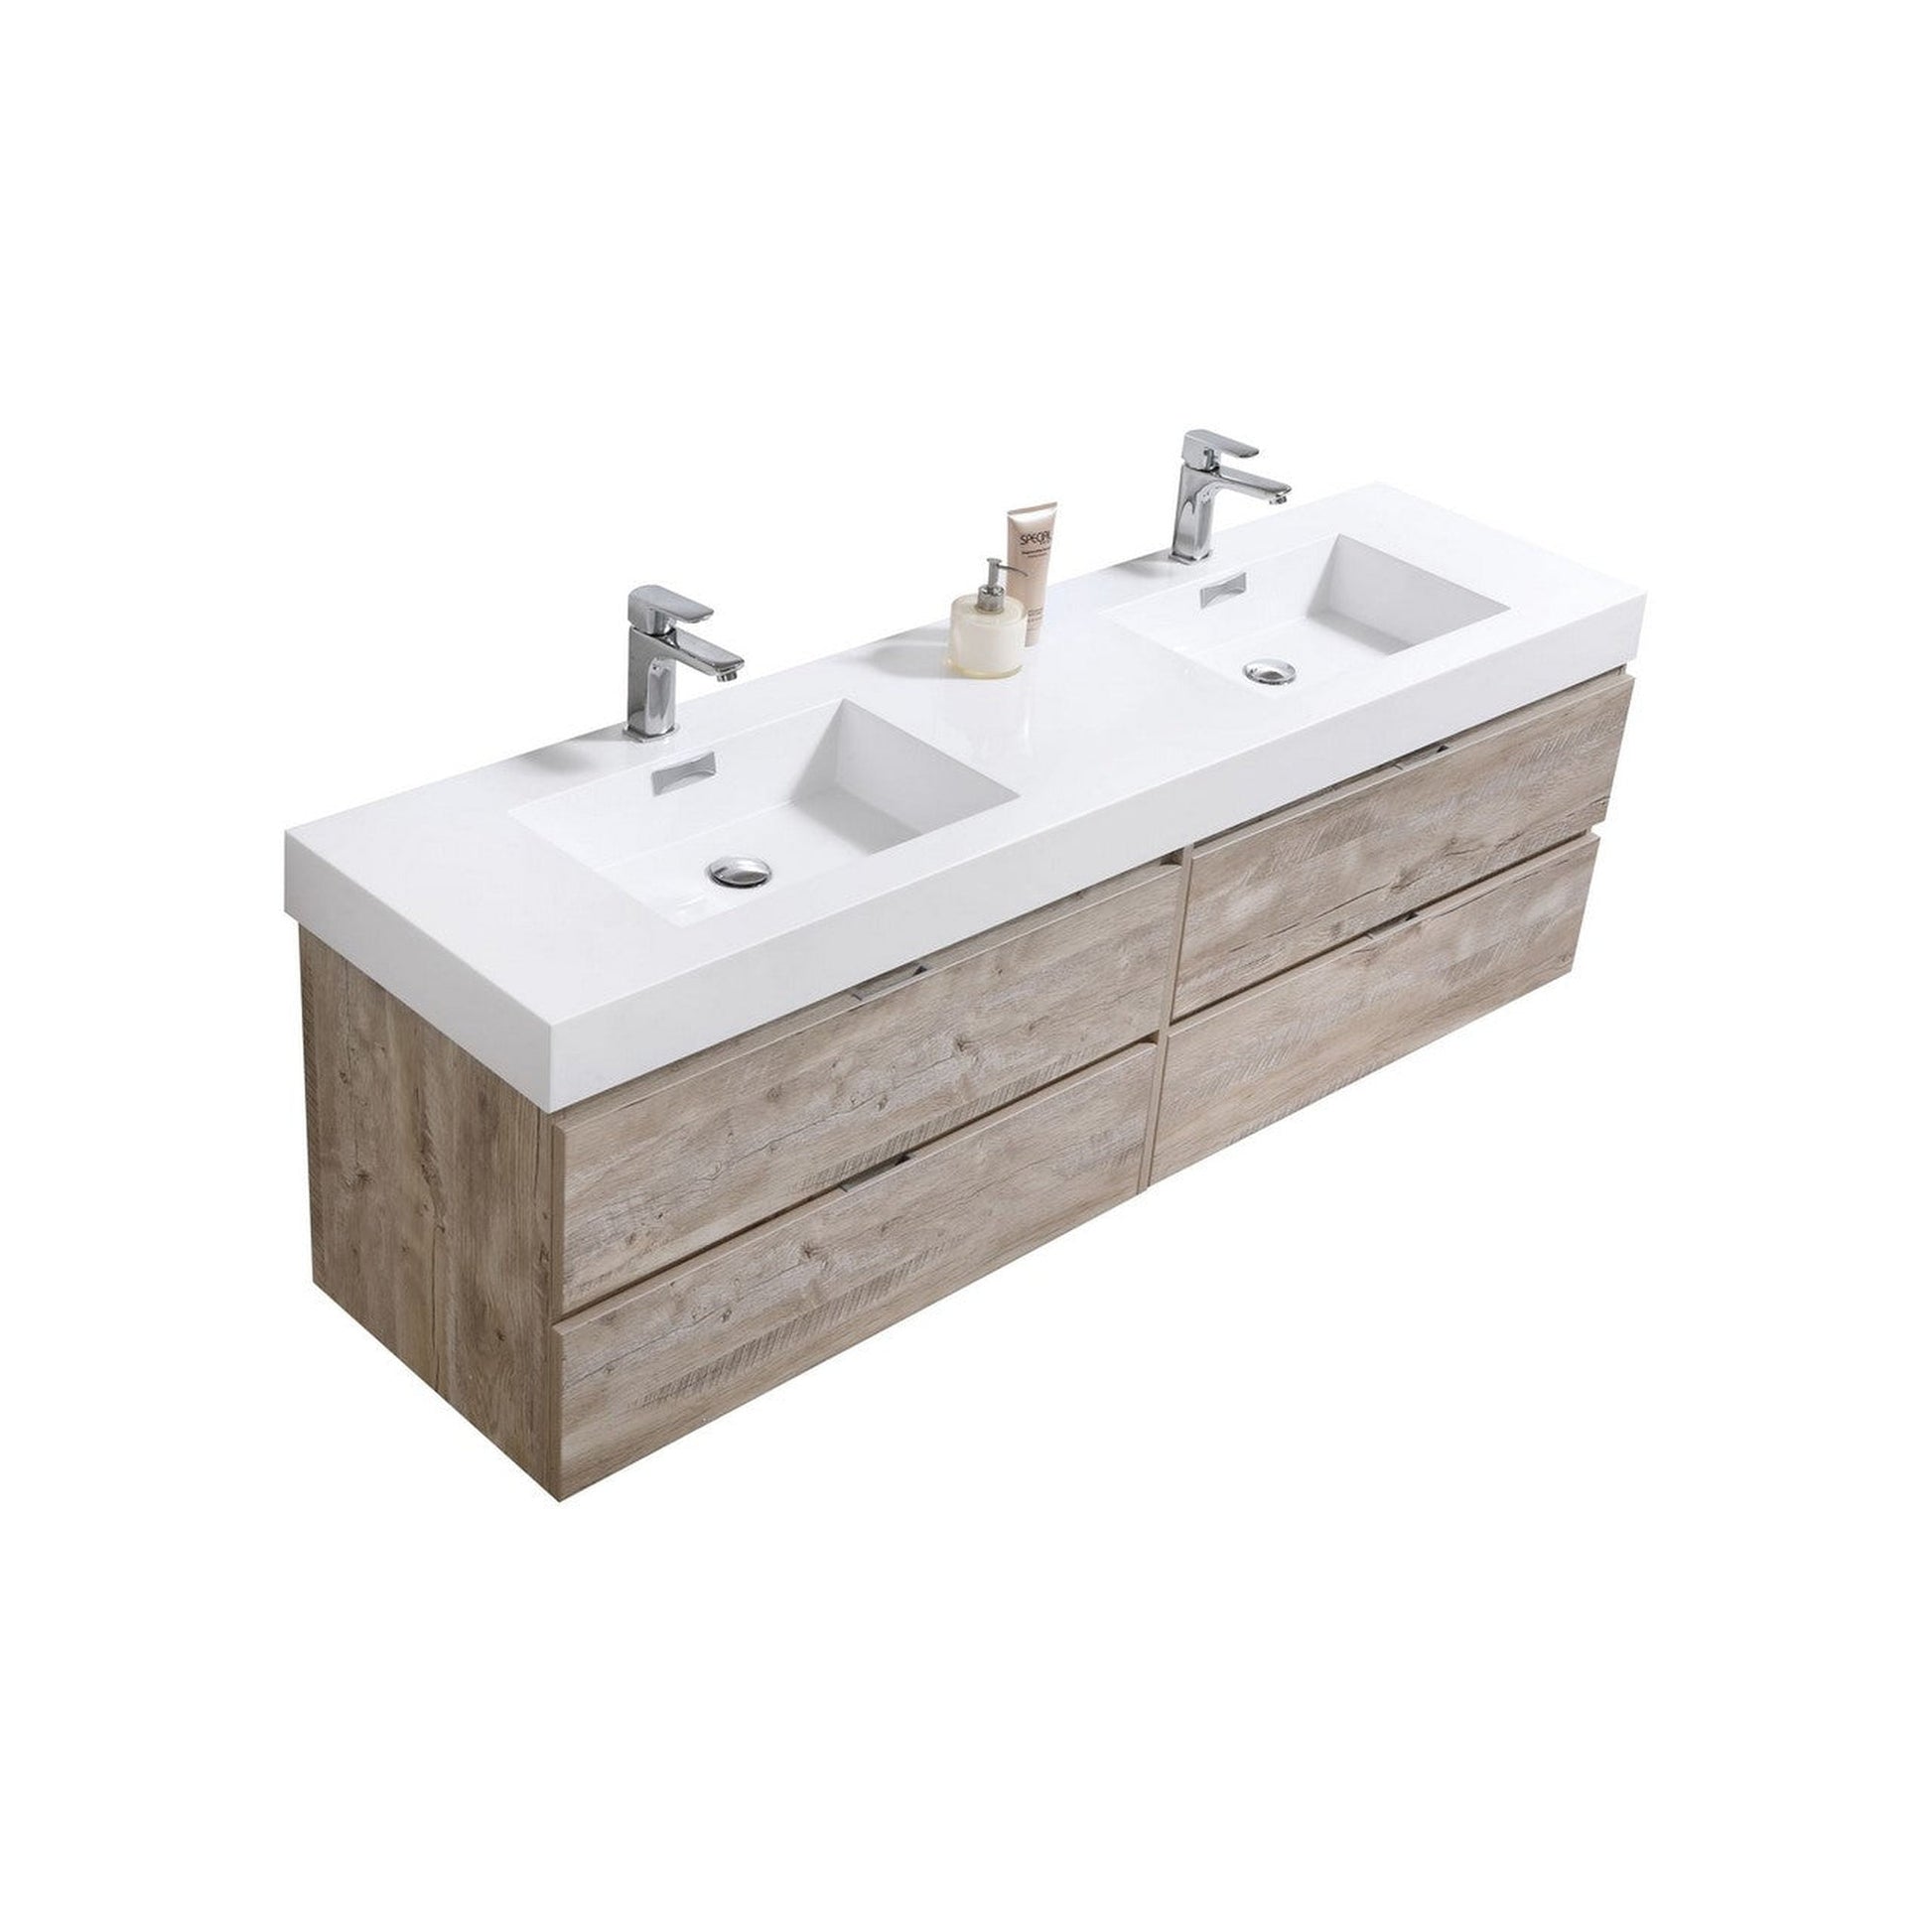 KubeBath Bliss 72" Nature Wood Wall-Mounted Modern Bathroom Vanity With Double Integrated Acrylic Sink With Overflow and 24" Two Framed Mirrors